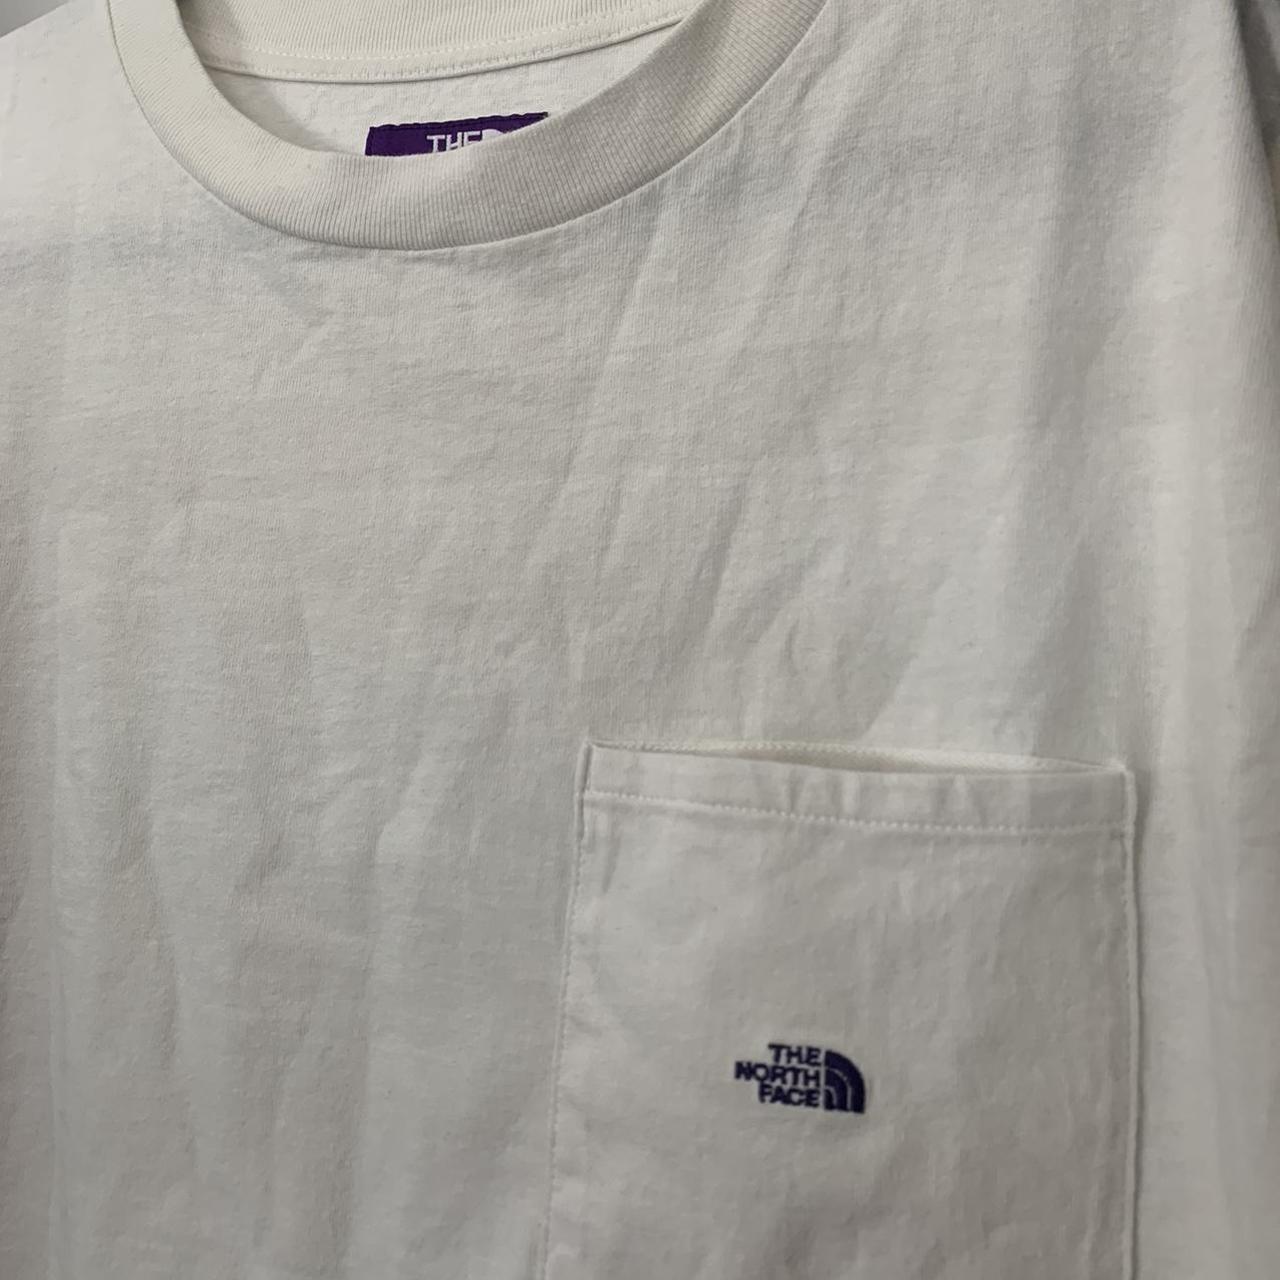 The North Face Purple Label Men's White and Purple T-shirt (4)